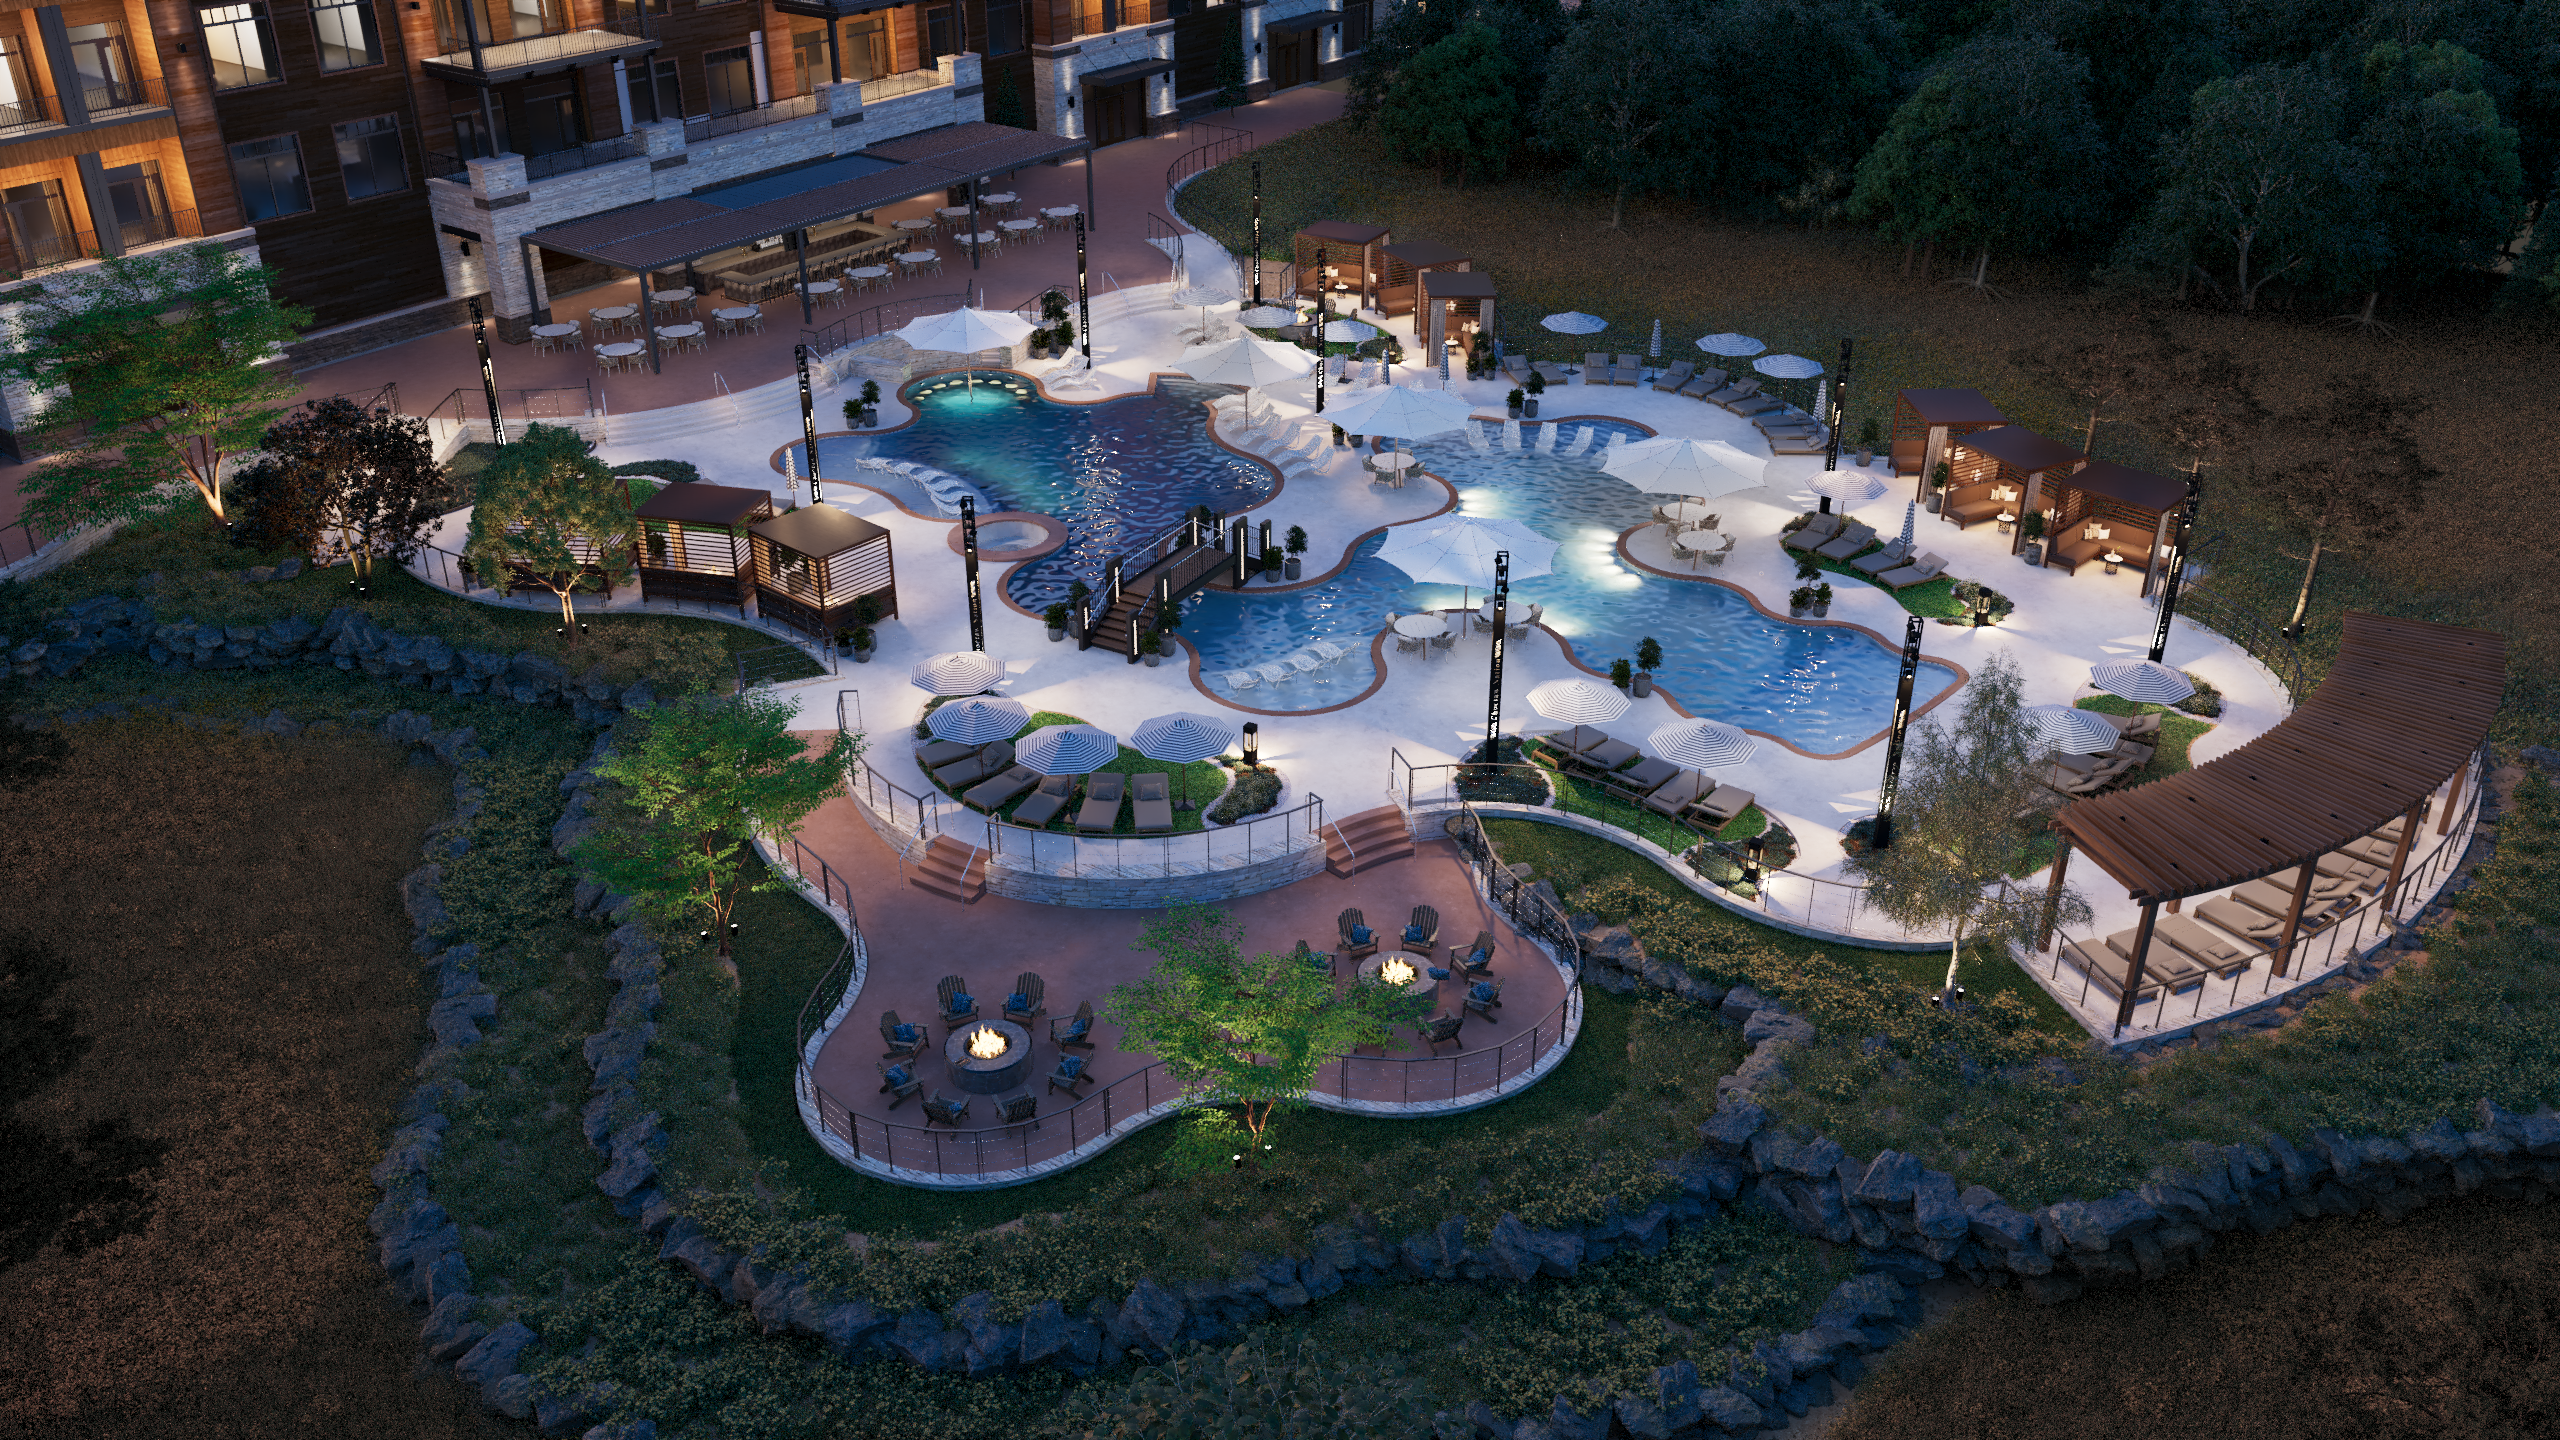 What the pool might look like, trees, pavilions, tall lights